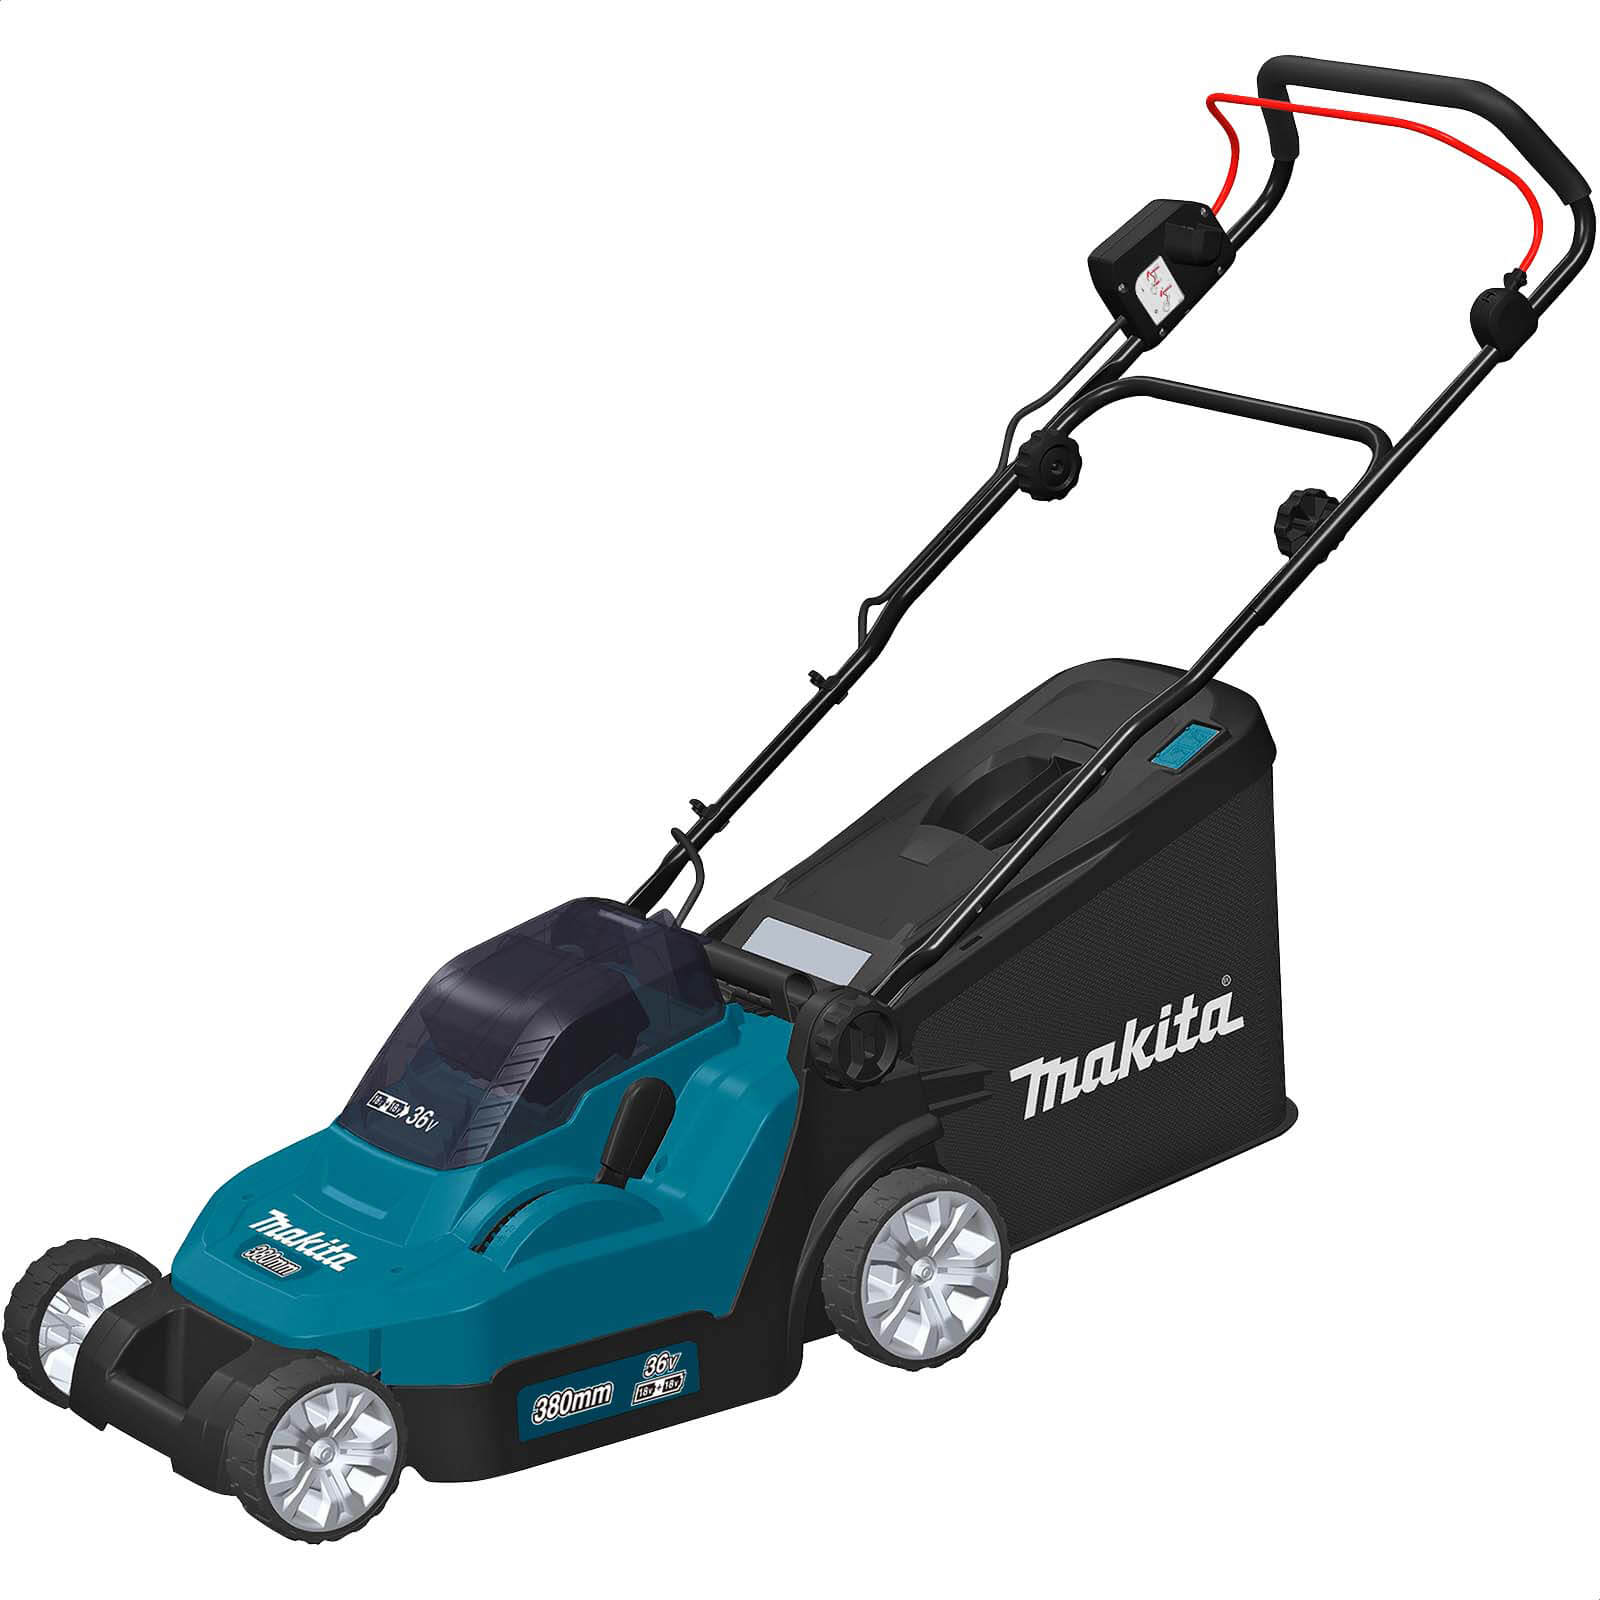 Makita DLM382 Twin 18v LXT Cordless Lawnmower 380mm No Batteries No Charger